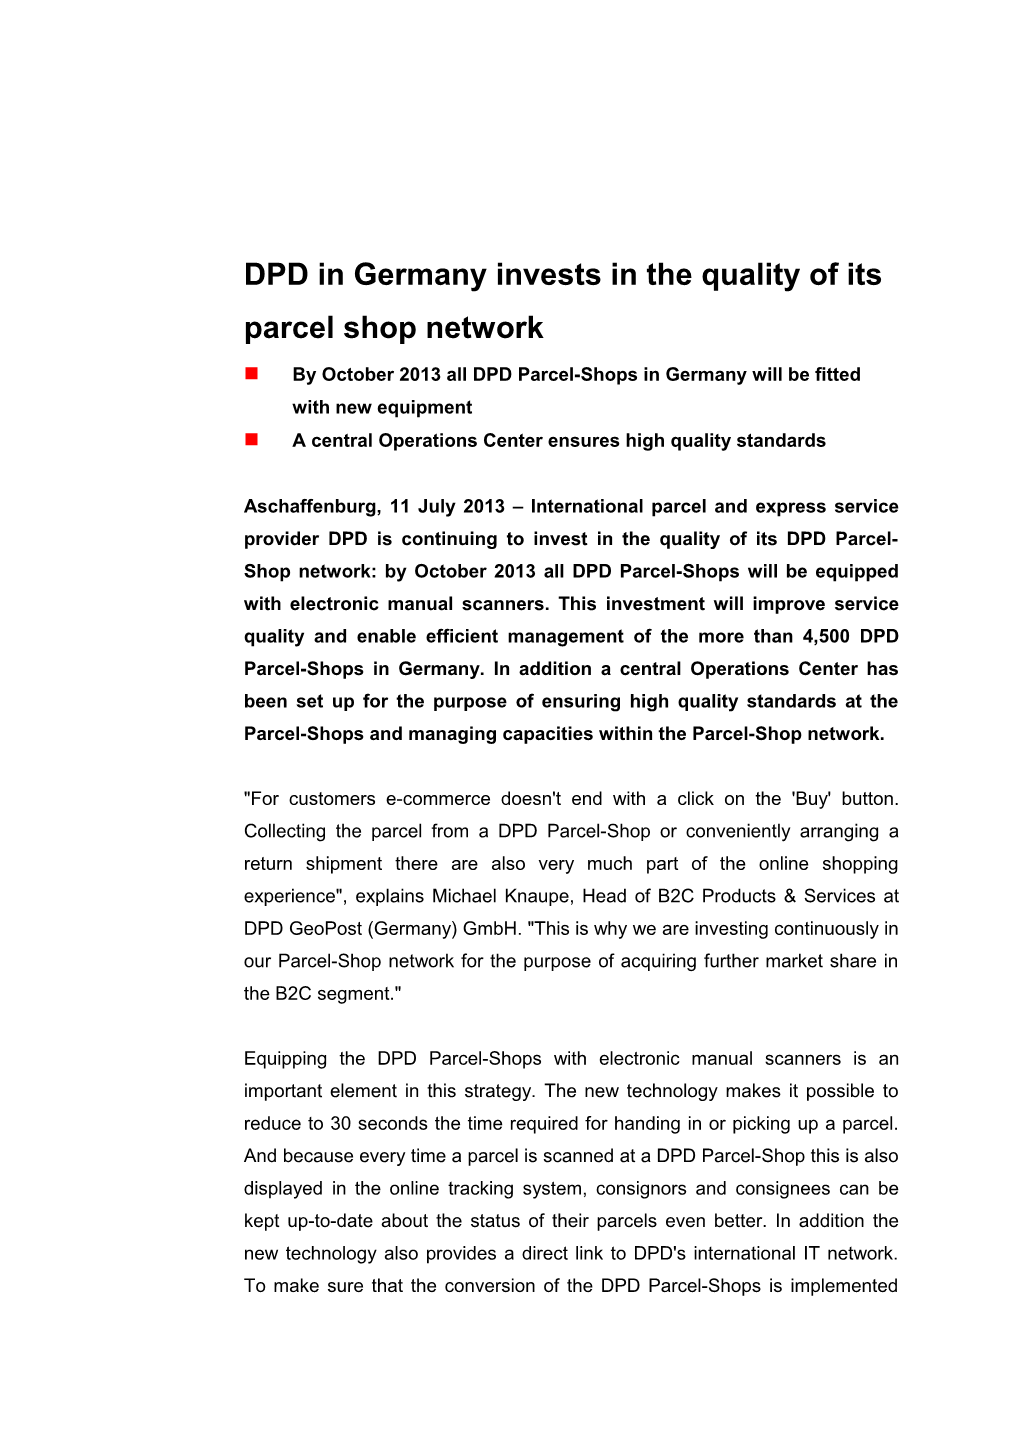 DPD in Germany Invests in the Quality of Its Parcel Shop Network